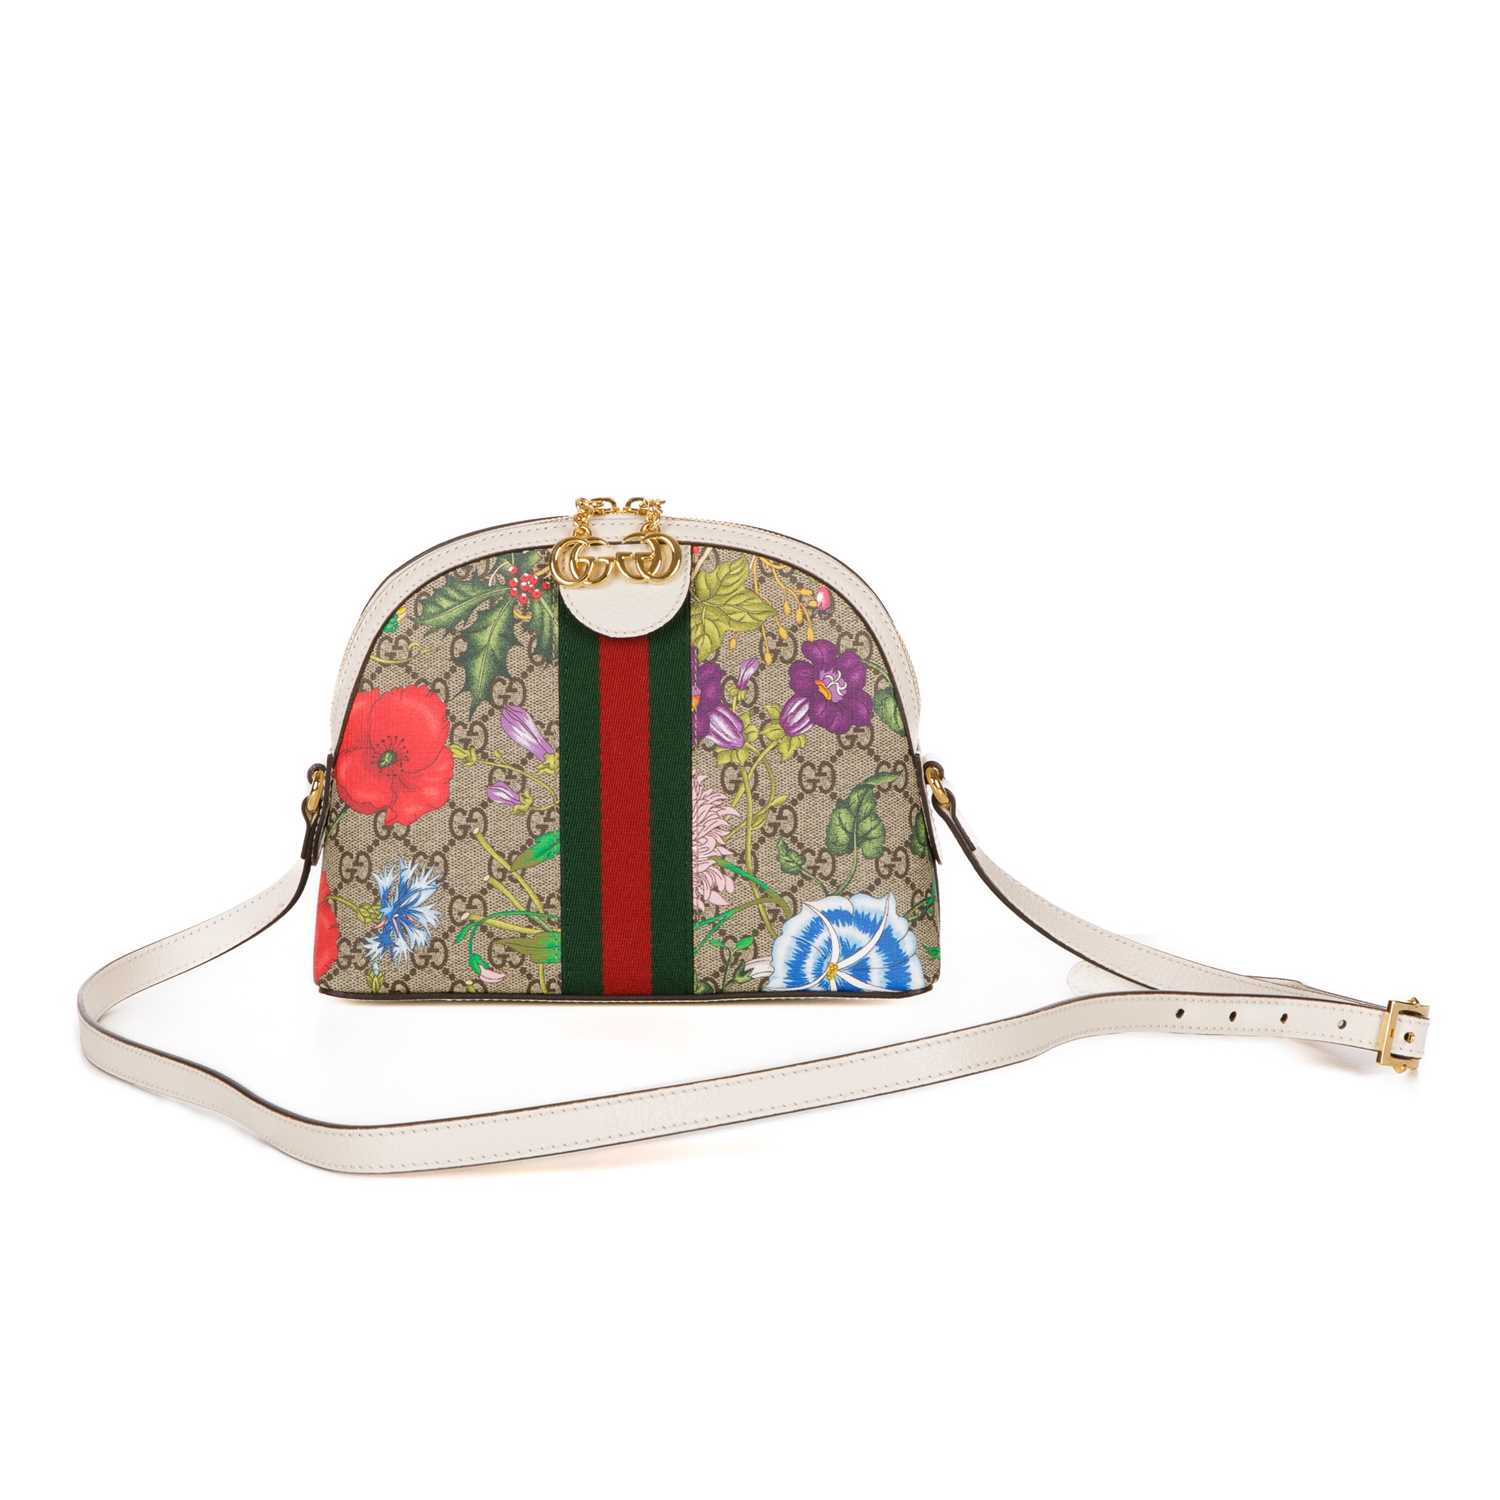 Gucci, a Supreme Floral Web Ophidia handbag, crafted from beige GG coated canvas, overlayed with - Image 2 of 4